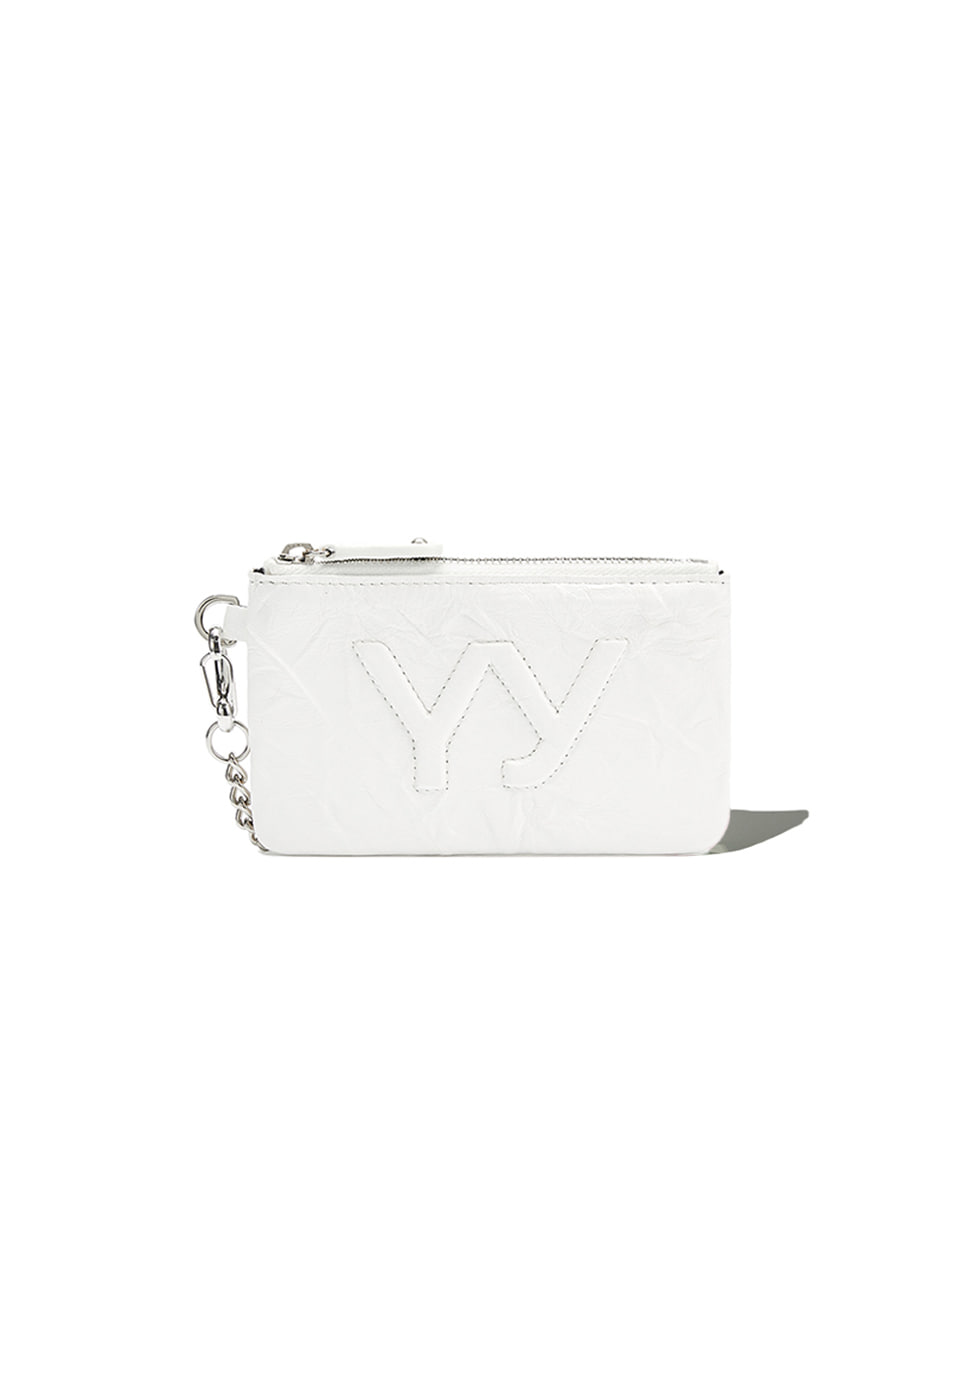 YY CRINKLE CHAIN WALLET WITH MIRROR, WHITE